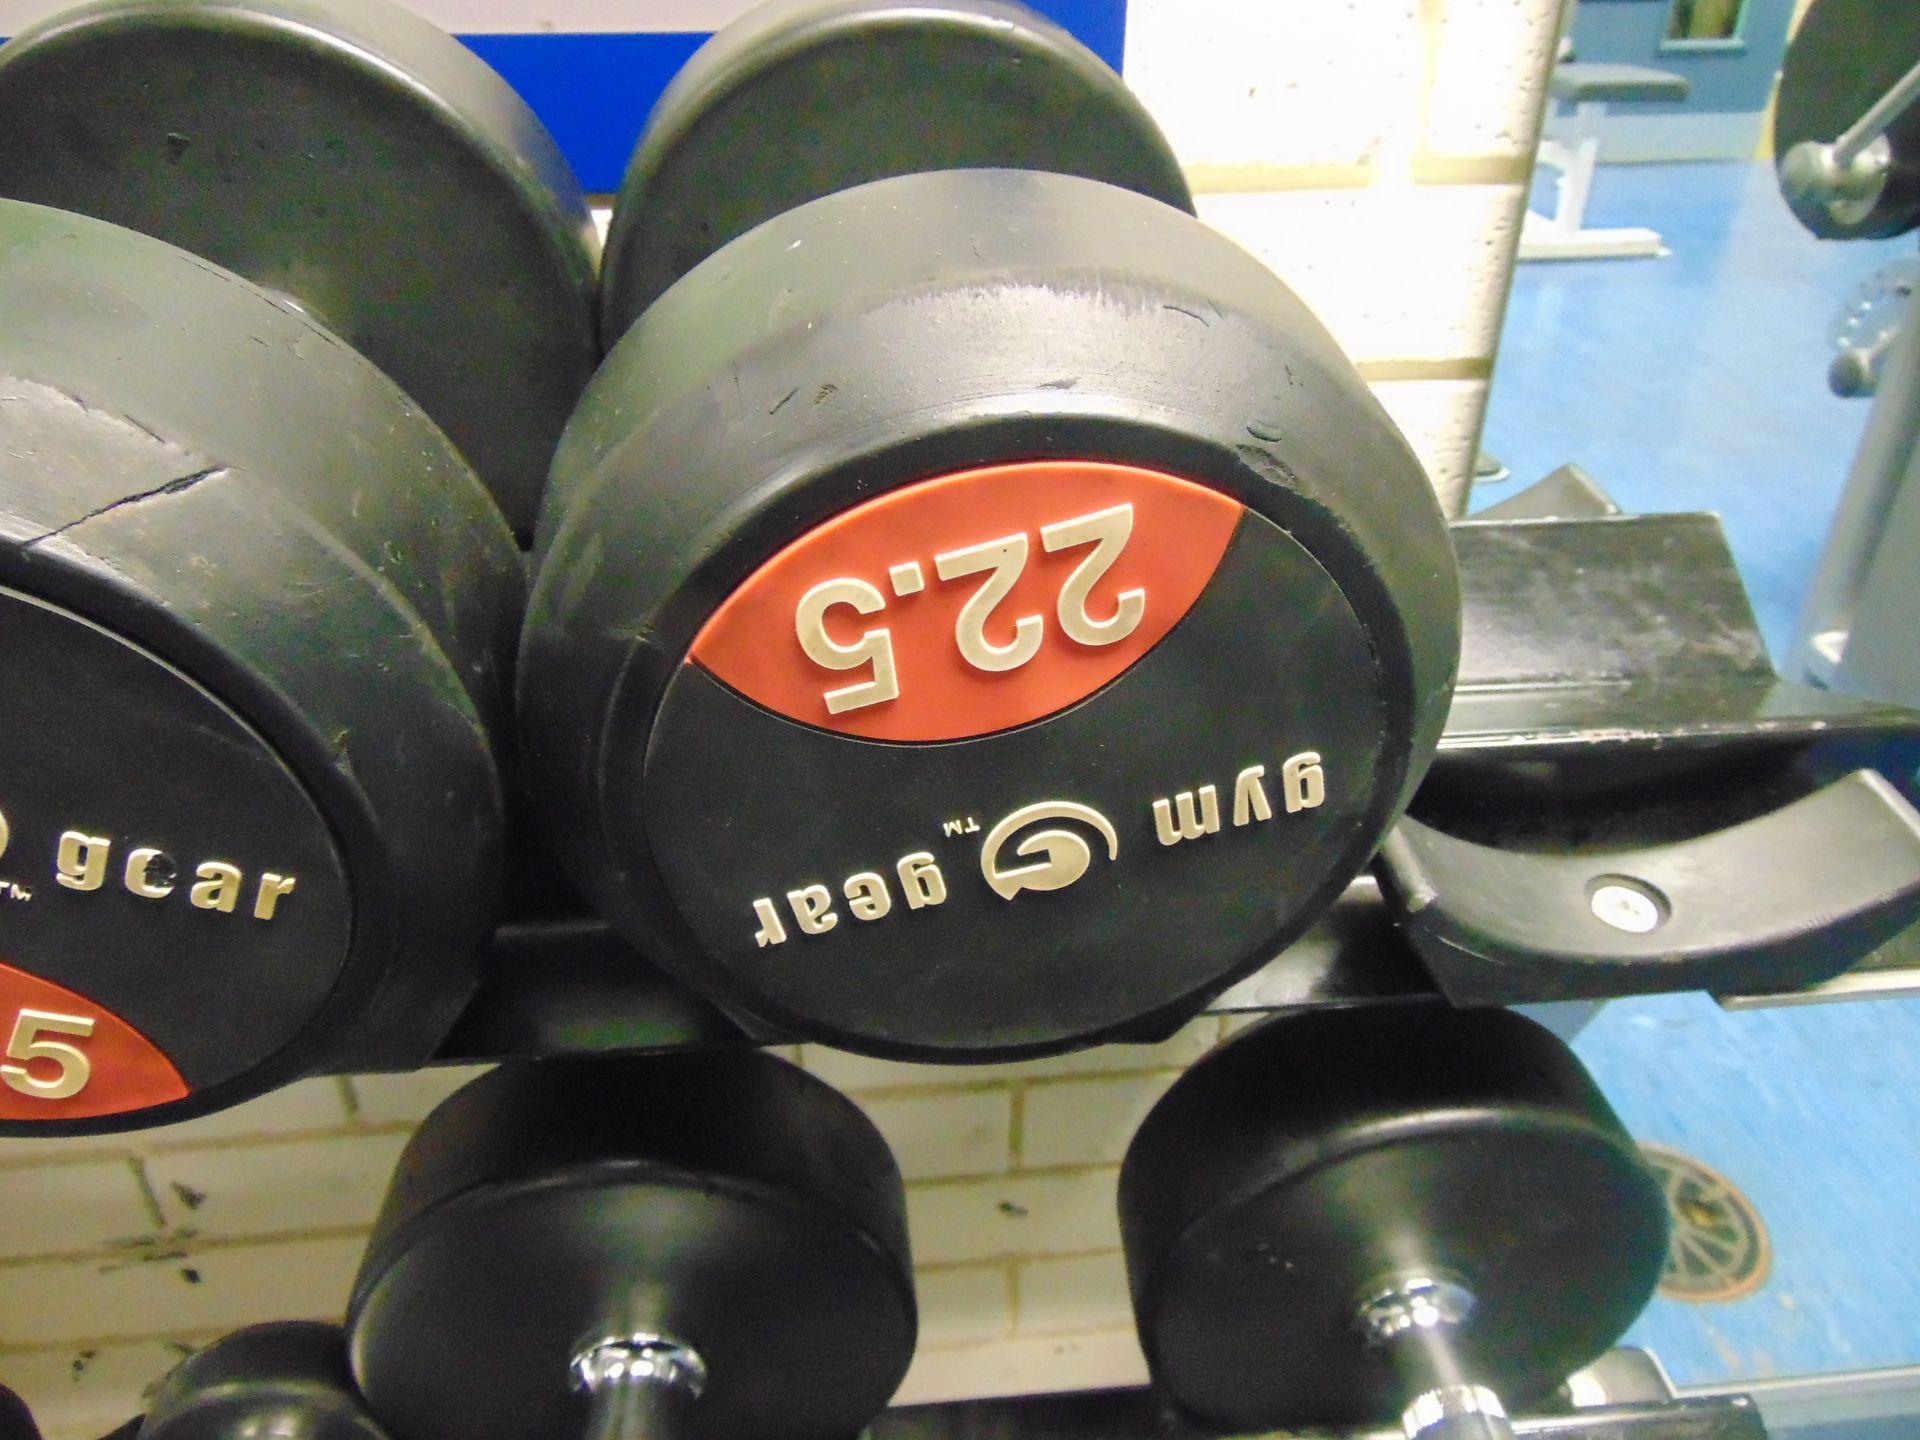 Gym Gear Dumb Bell Station Weights From 2kg to 25kg - Image 3 of 4